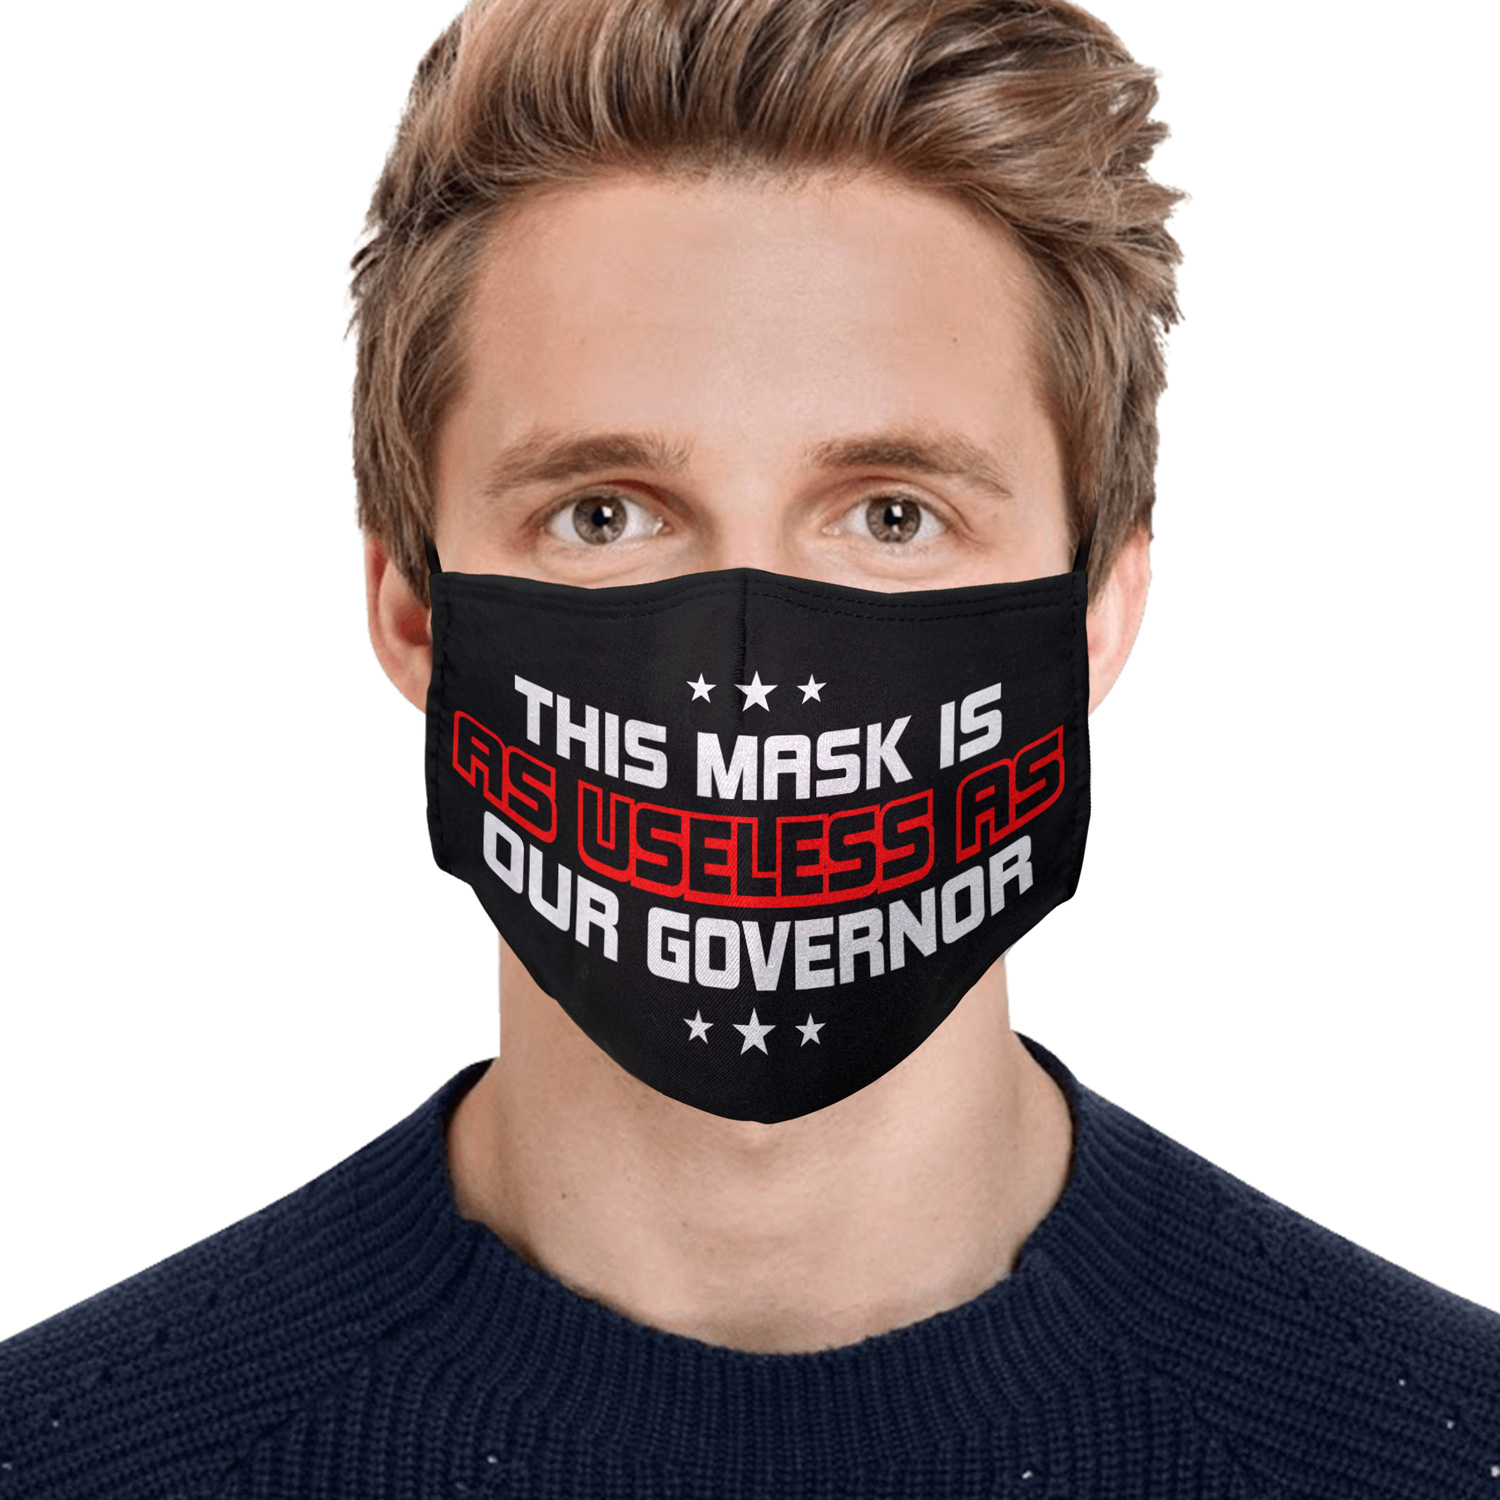 This mask is as useless as our governor face mask